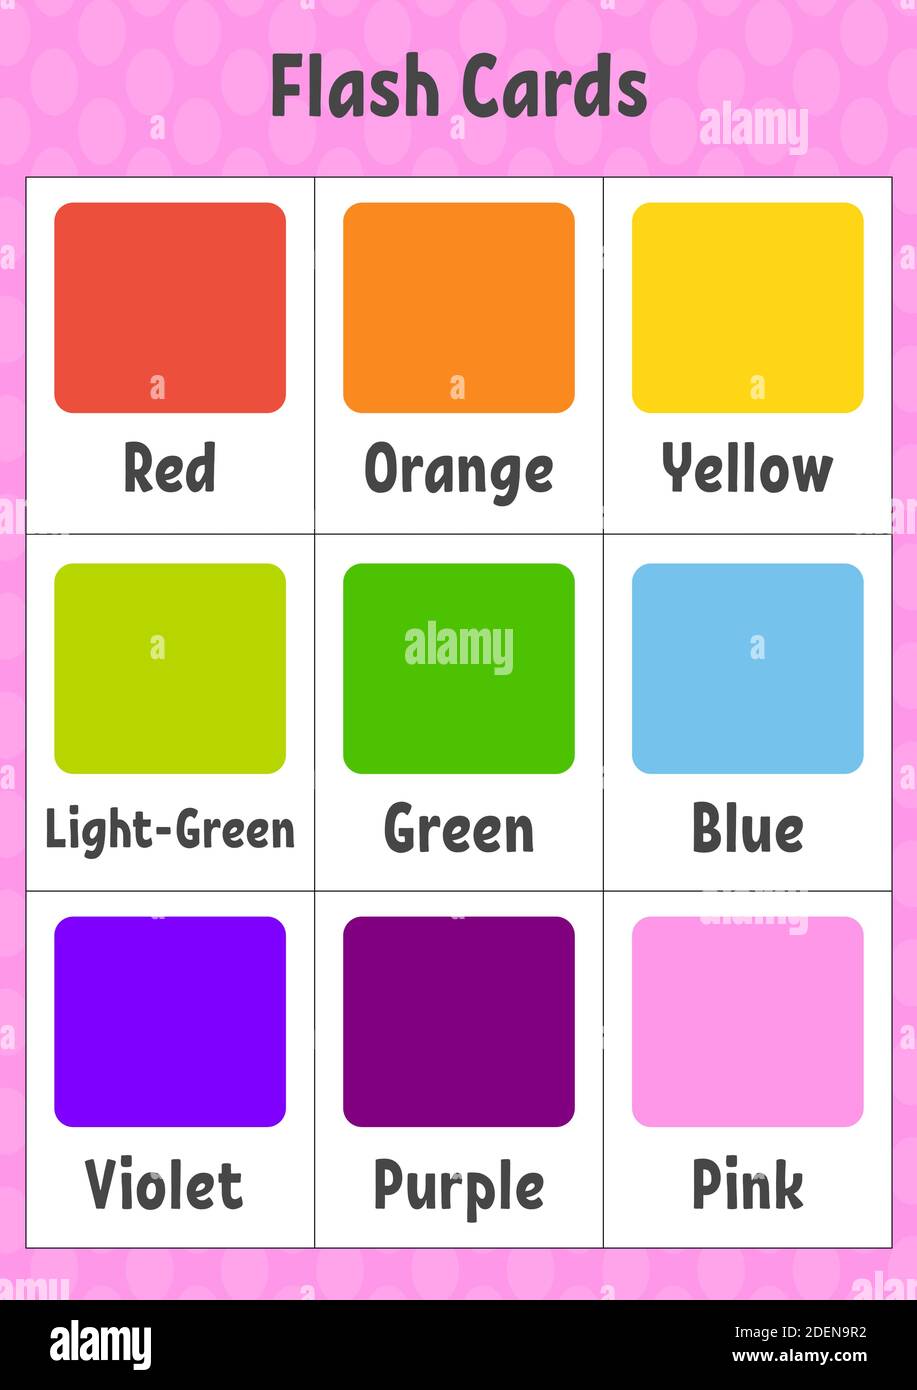 Flash cards. Learning colors. Education developing worksheet